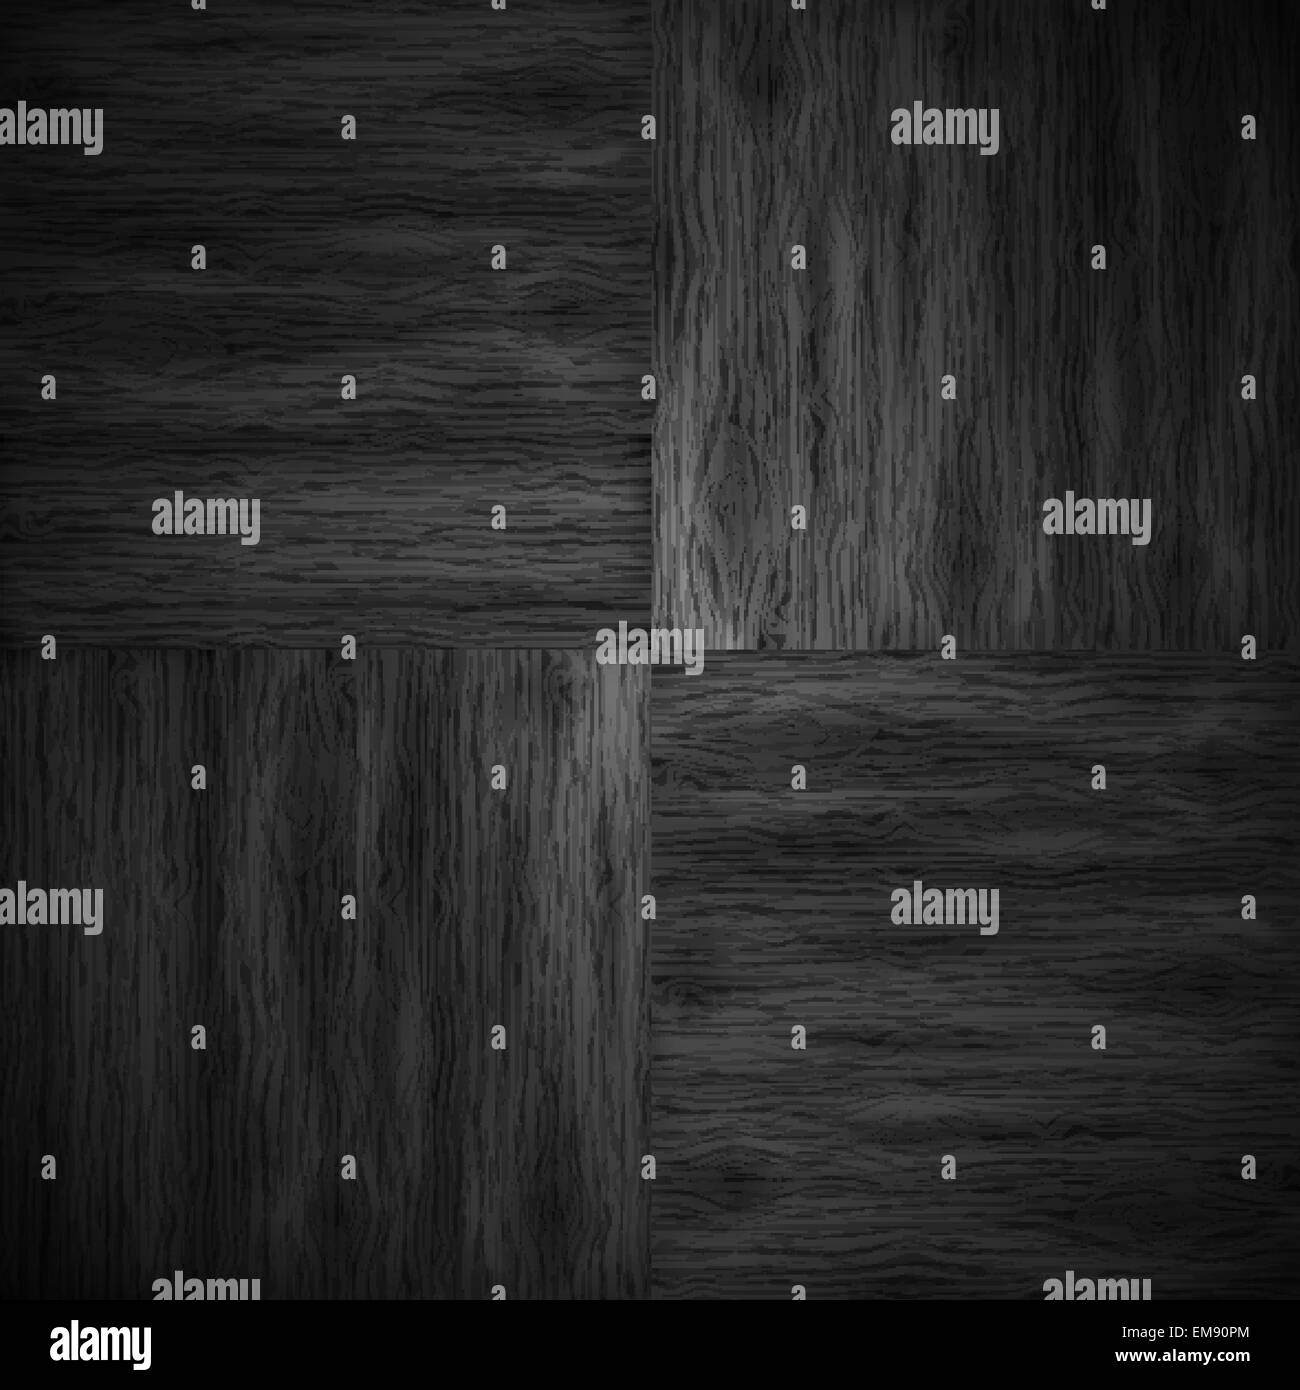 Illustrated wood parquet texture. Stock Vector